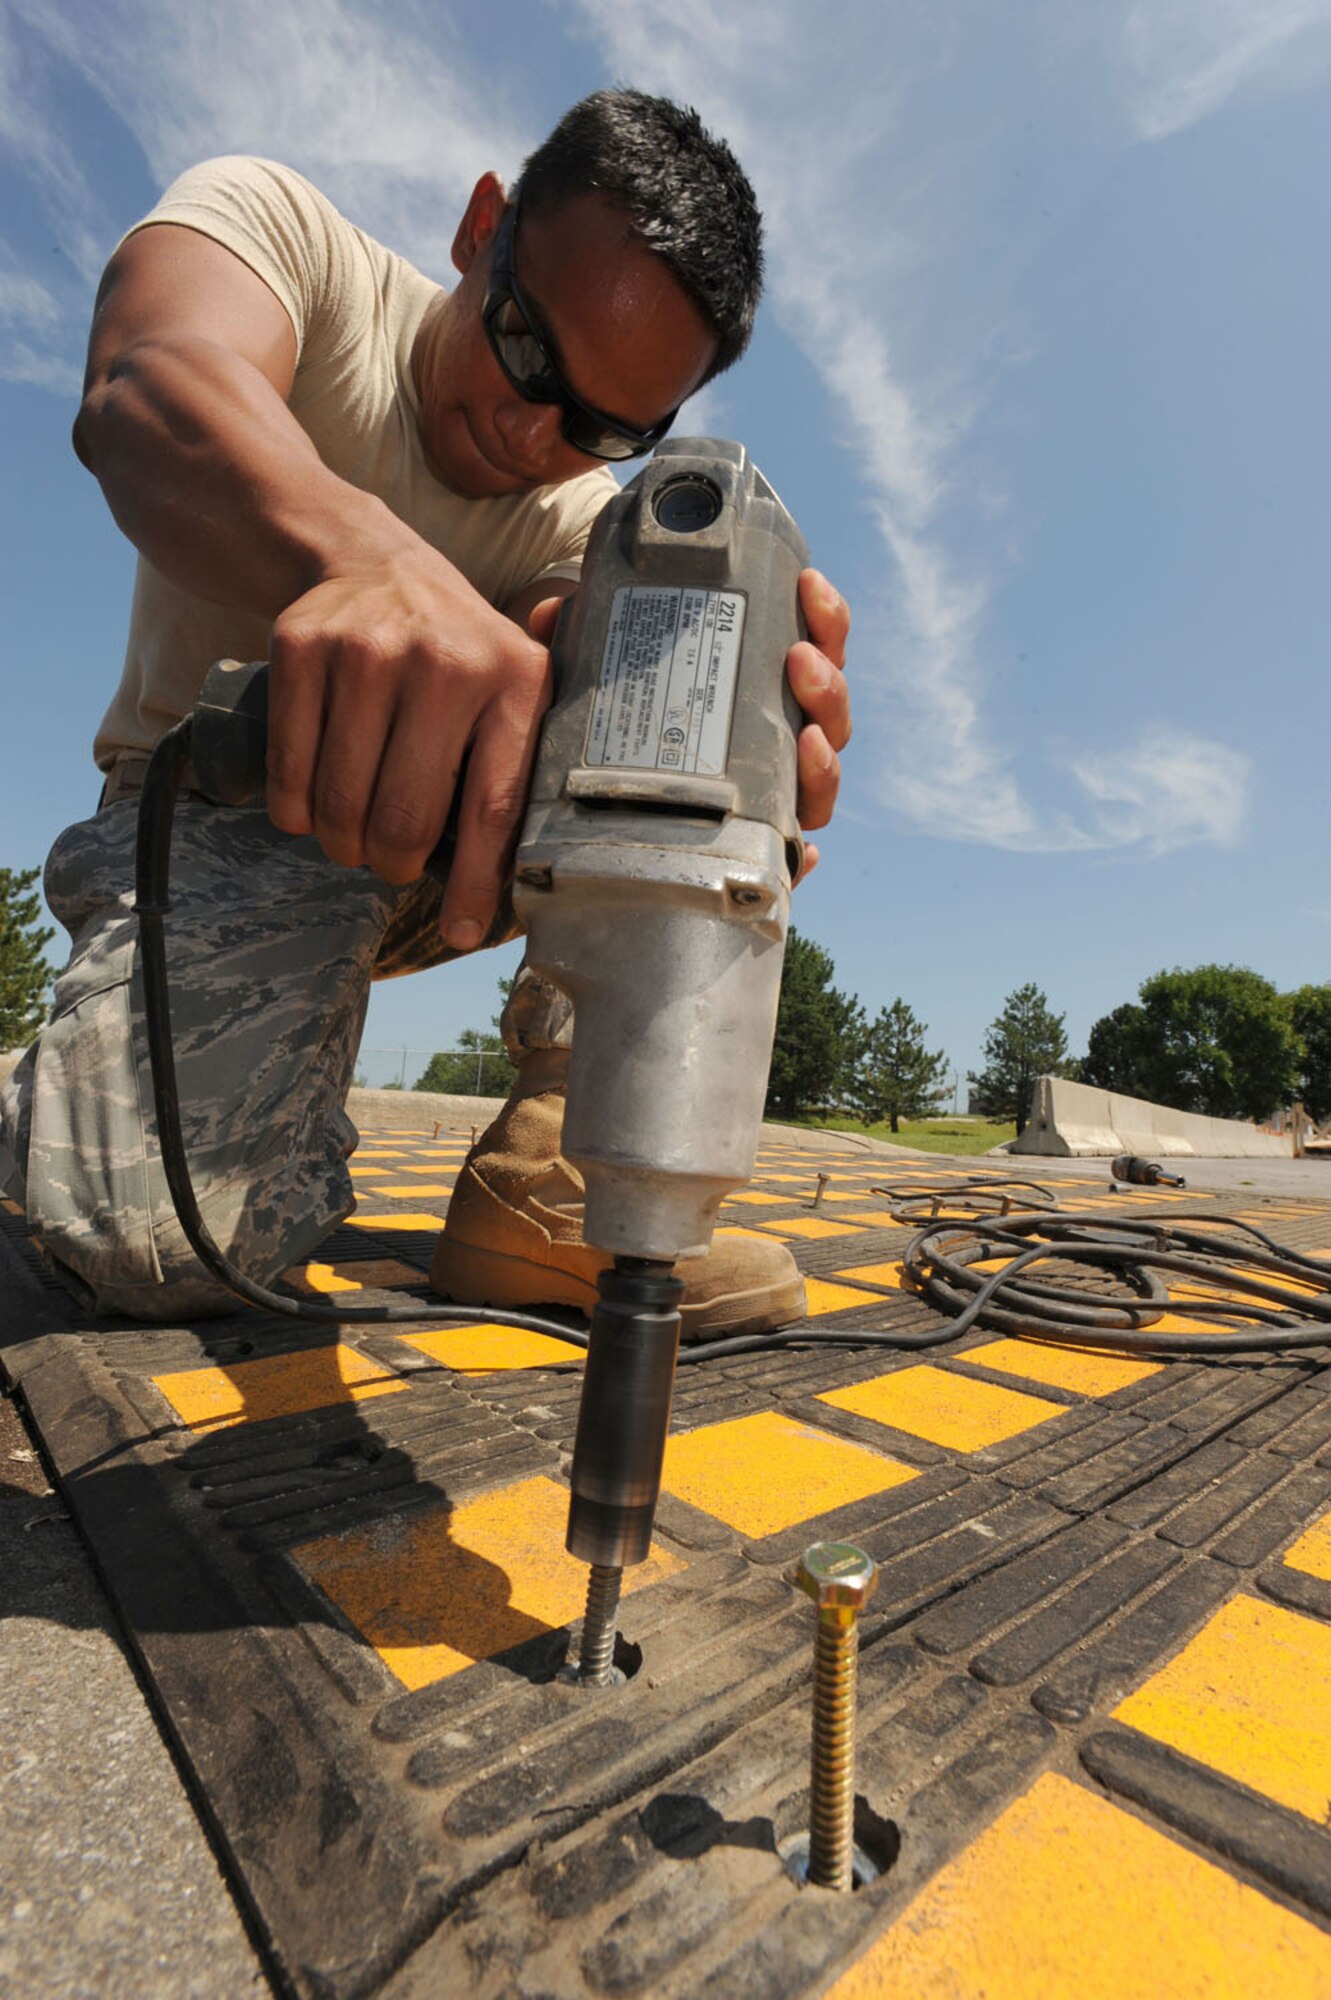 WHITEMAN AIR FORCE BASE, Mo. – Airman 1st Class Ralph Dagza, 509th Civil Engineer Squadron, uses an impact drill to run bolts into speed humps near Arnold Gate, Aug. 11. Each individual piece of the speed humps must be laid out and predrilled, then bolted down. Arnold gate is receiving three of these new fixtures to be completed by Aug. 12. The Lemay and Spirit gates will also be receiving these fixtures in the upcoming weeks. (U.S. Air Force Photo/Airman First Class Carlin Leslie)